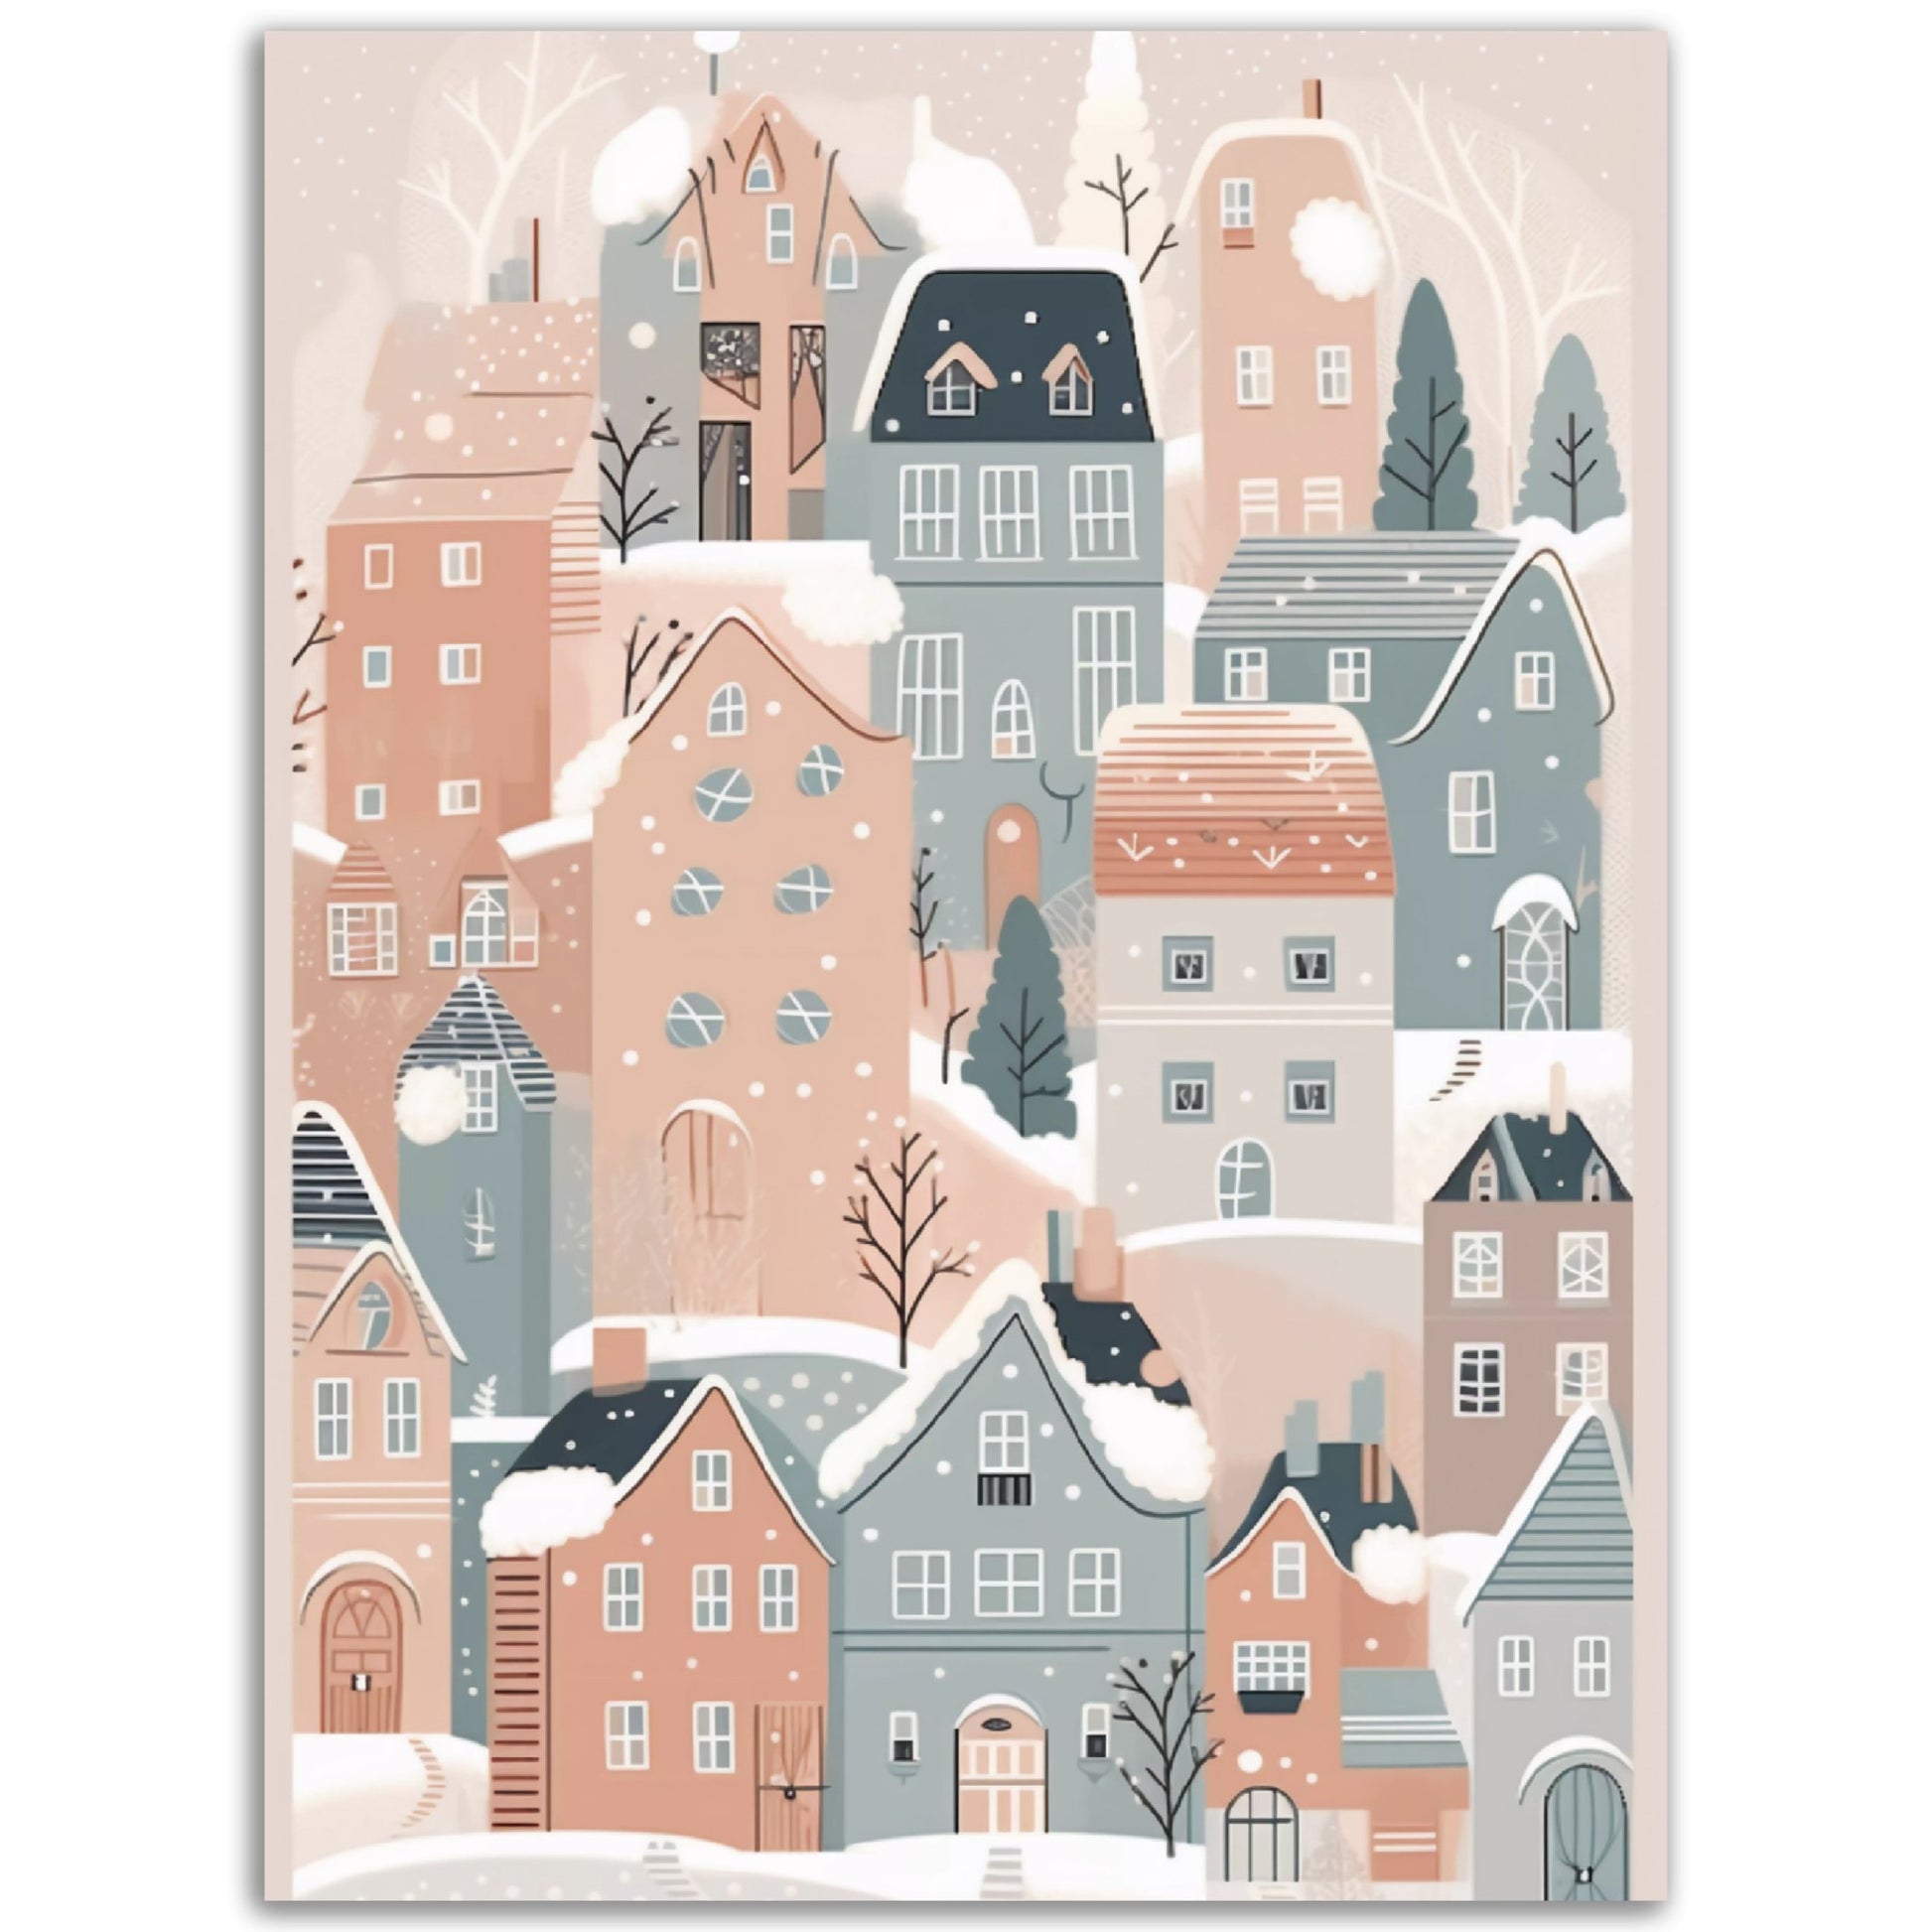 An illustration of a Christmas Town with snow on the ground, perfect for a Poster or Wall Art.